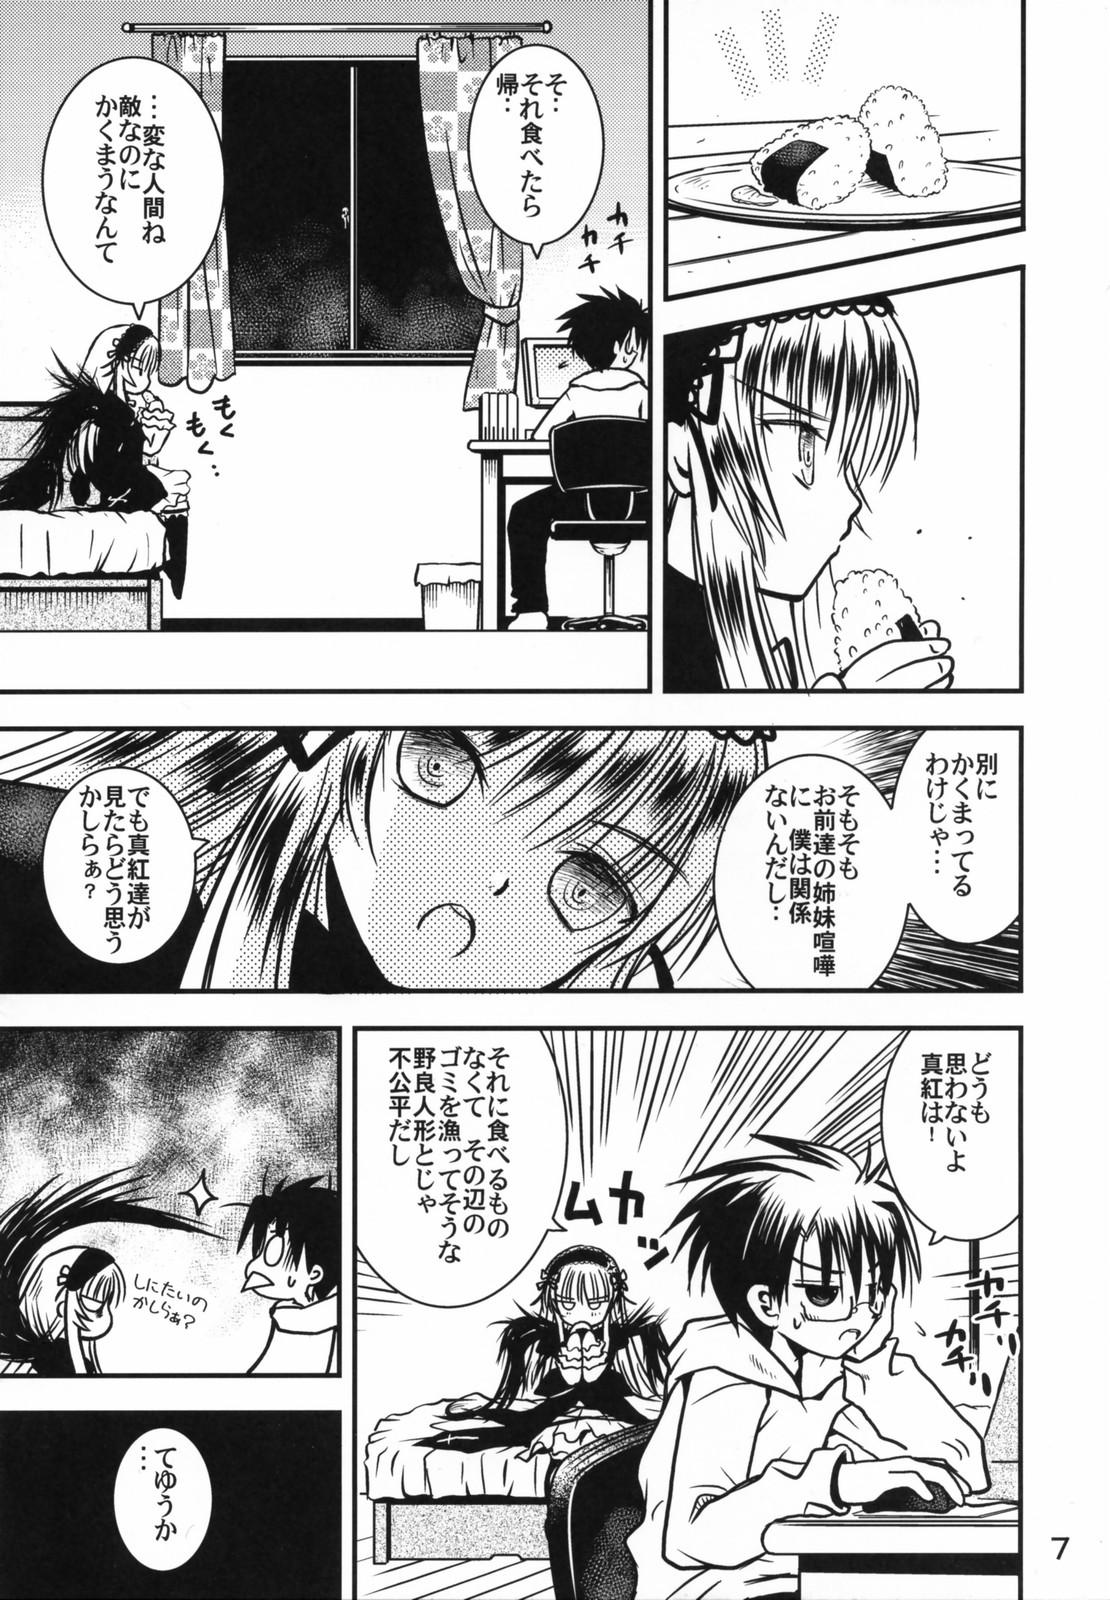 Bang A caprice - Rozen maiden Rabo - Page 6